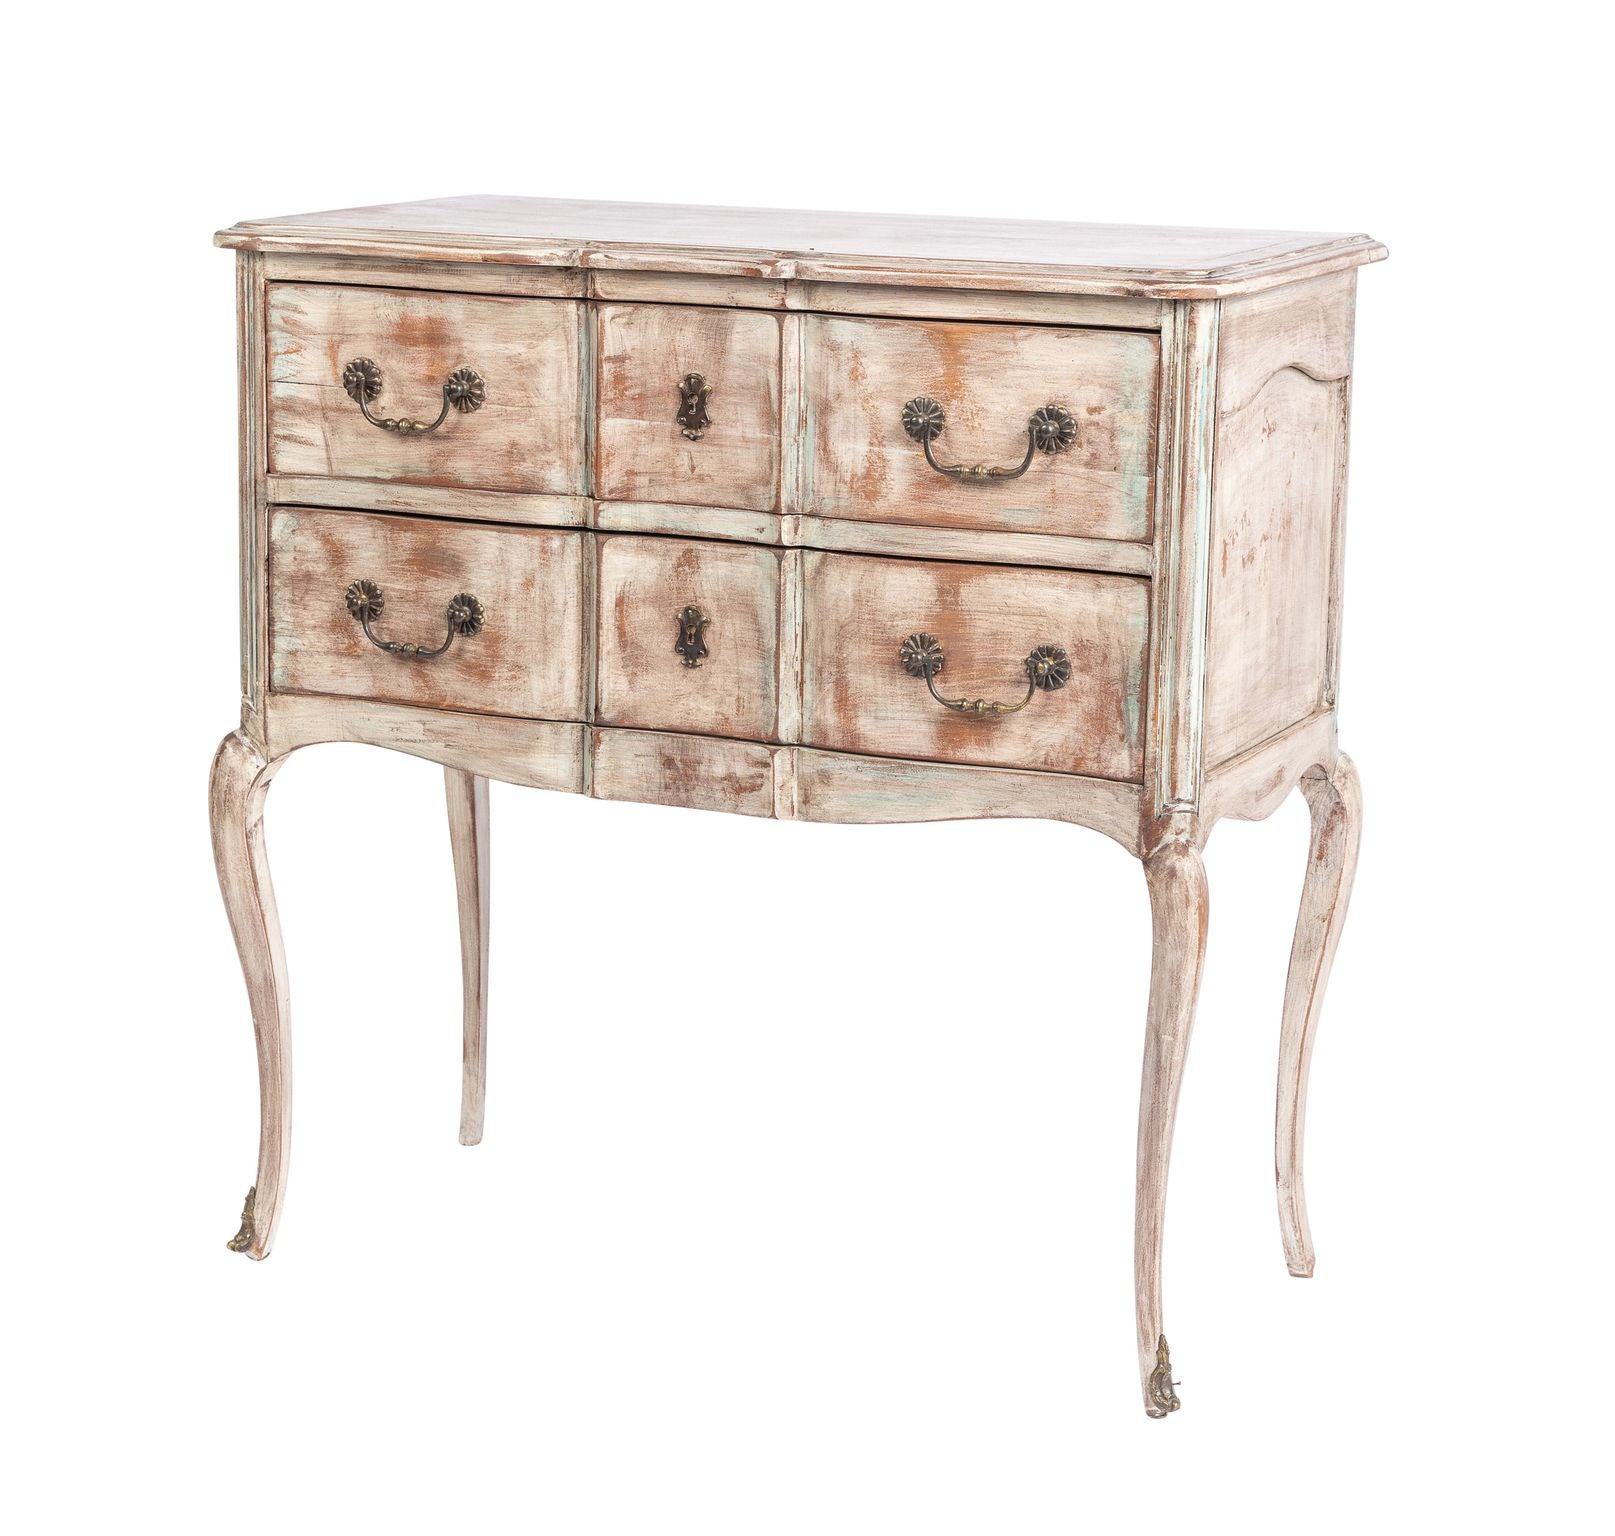 Early 20th century antique French painted side table with drawers from Paris